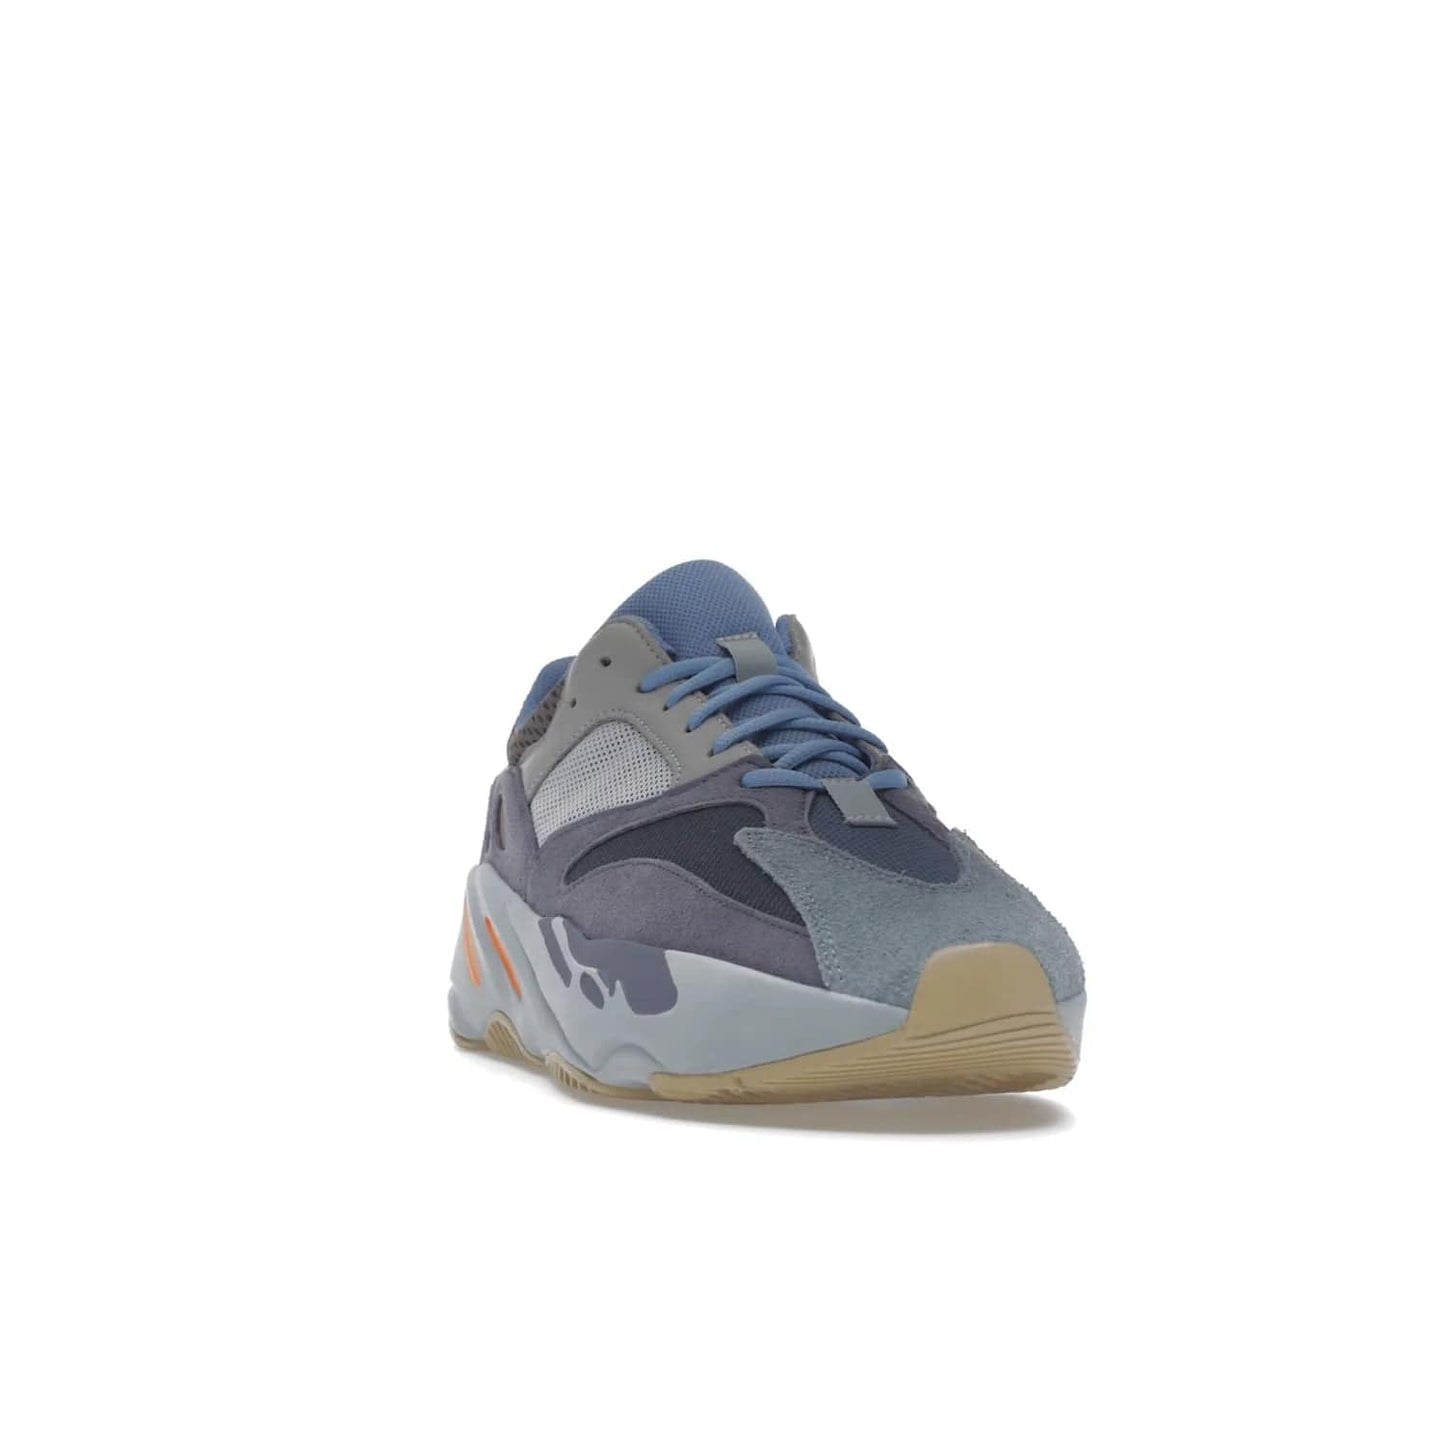 adidas Yeezy Boost 700 Carbon Blue - Image 8 - Only at www.BallersClubKickz.com - Style meets practicality with the adidas Yeezy Boost 700 Carbon Blue. Tonal grey and carbon blue mix of suede and mesh upper, grey midsole and gum outsole. Get yours today.